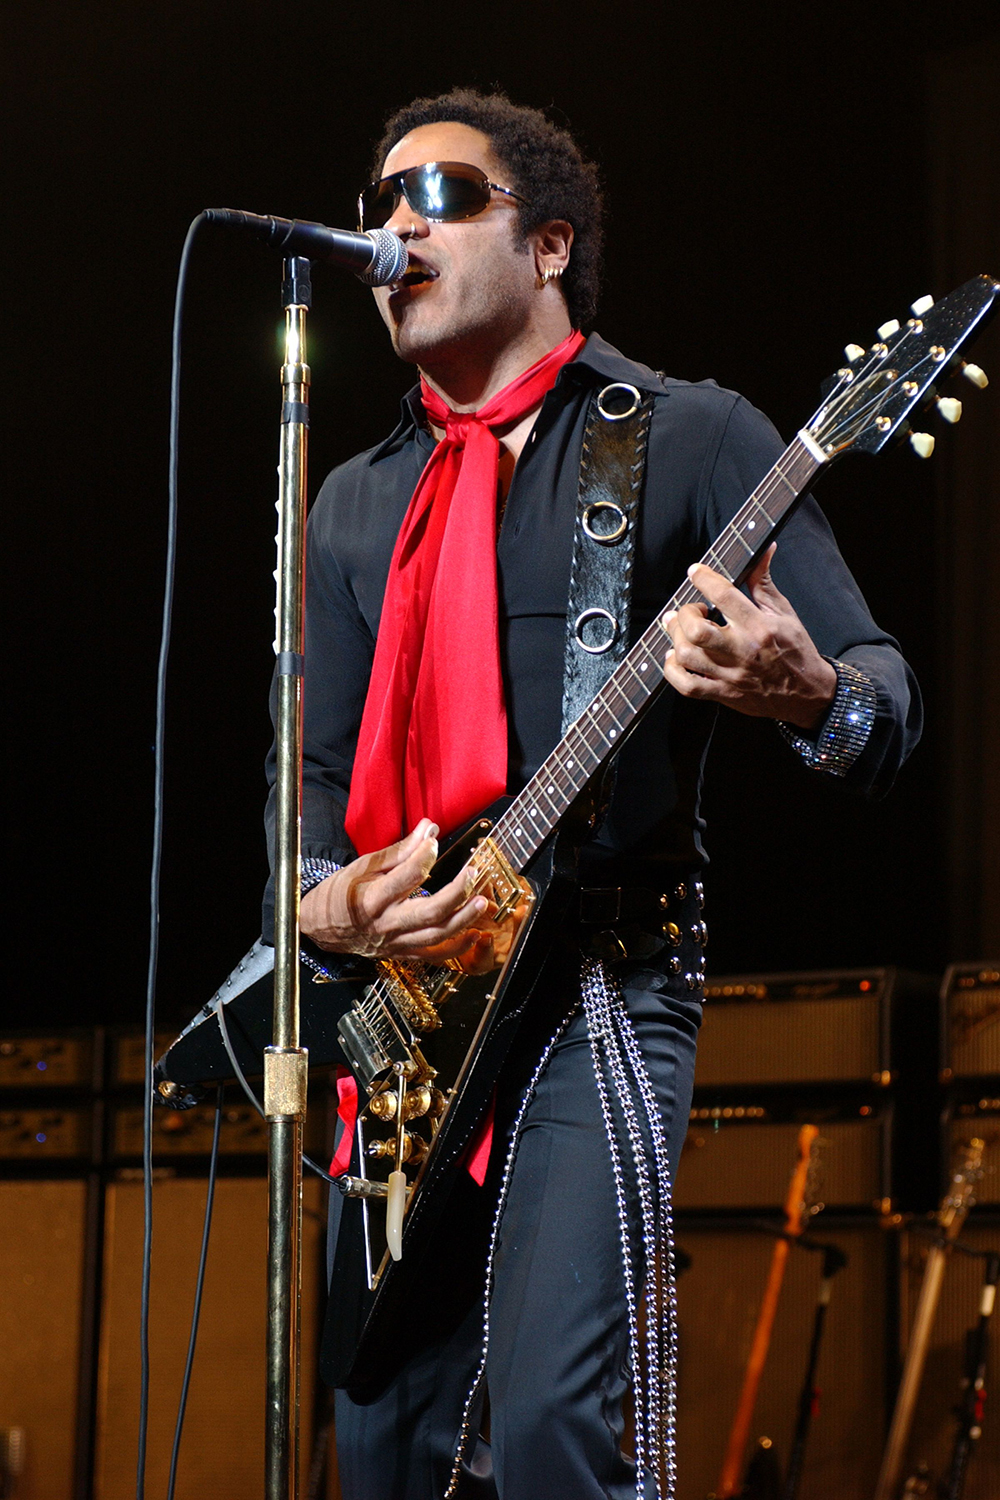 <p>Lenny Kravitz wears a red scarf while performing in Miami Beach, Florida on Apr. 13, 2005. His Flying V guitar was very rock and roll.</p>